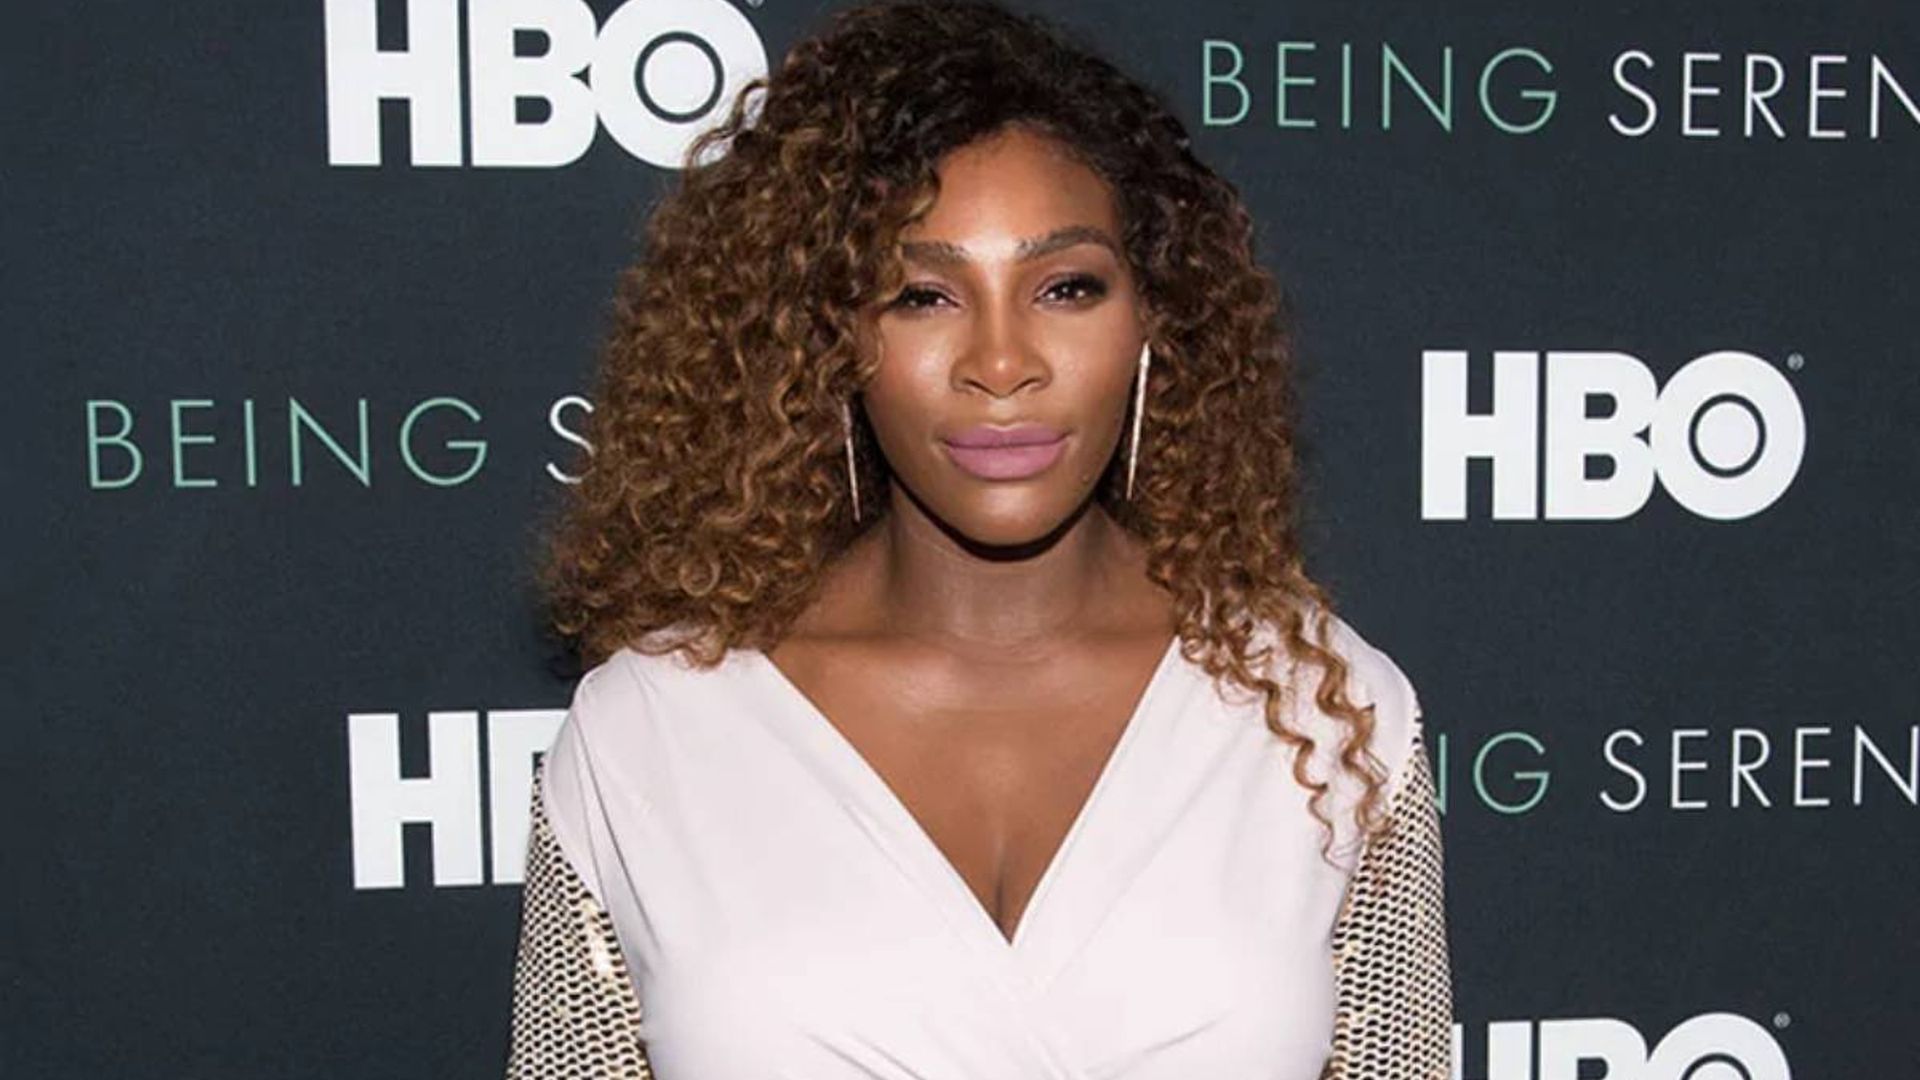 Serena Williams Outfit: Serena Williams Wears the Best Work